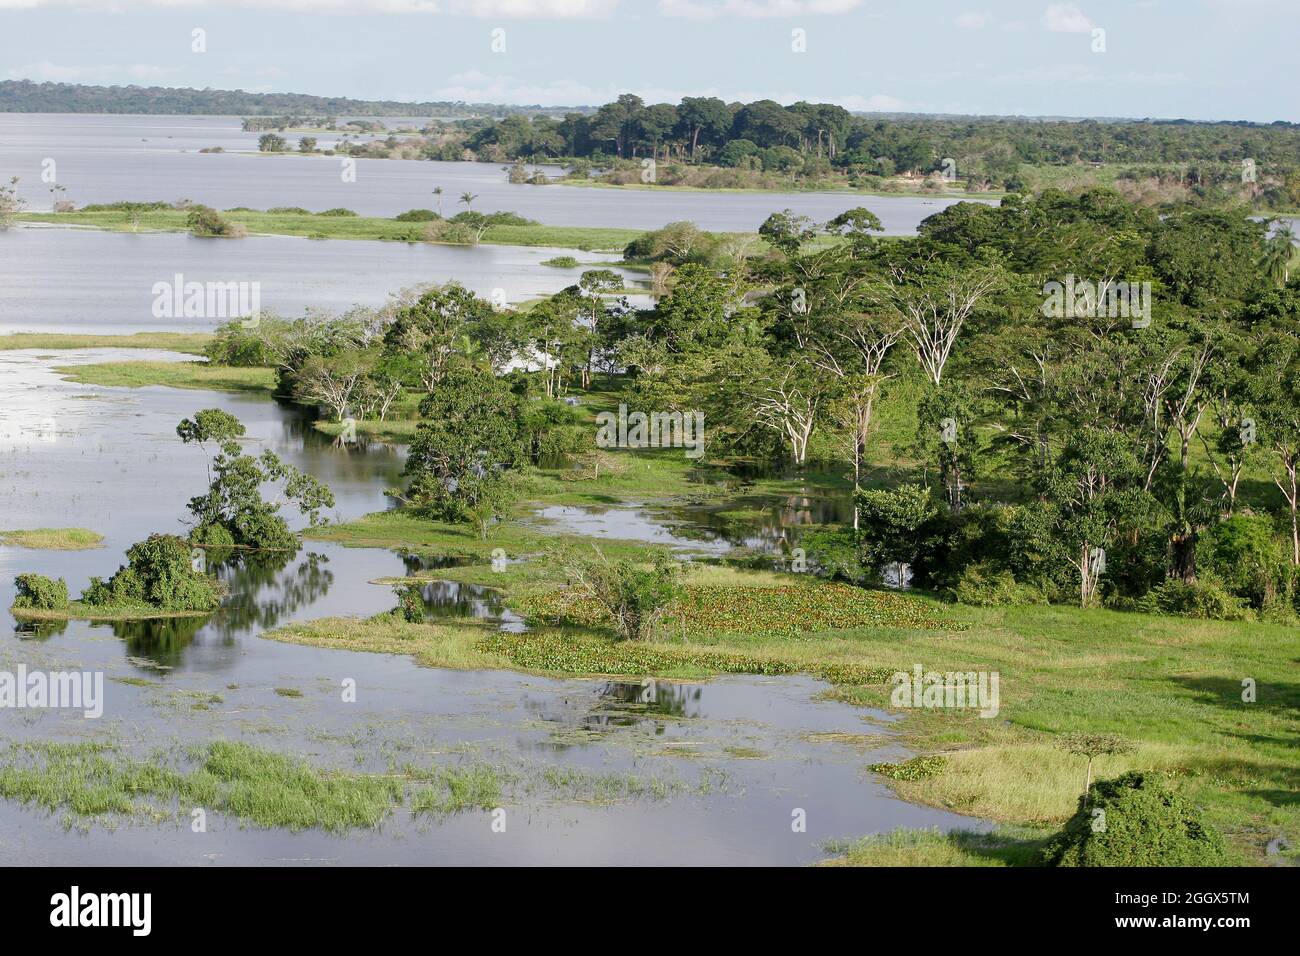 Tapajos river, flooded forest on riverside. Stock Photo